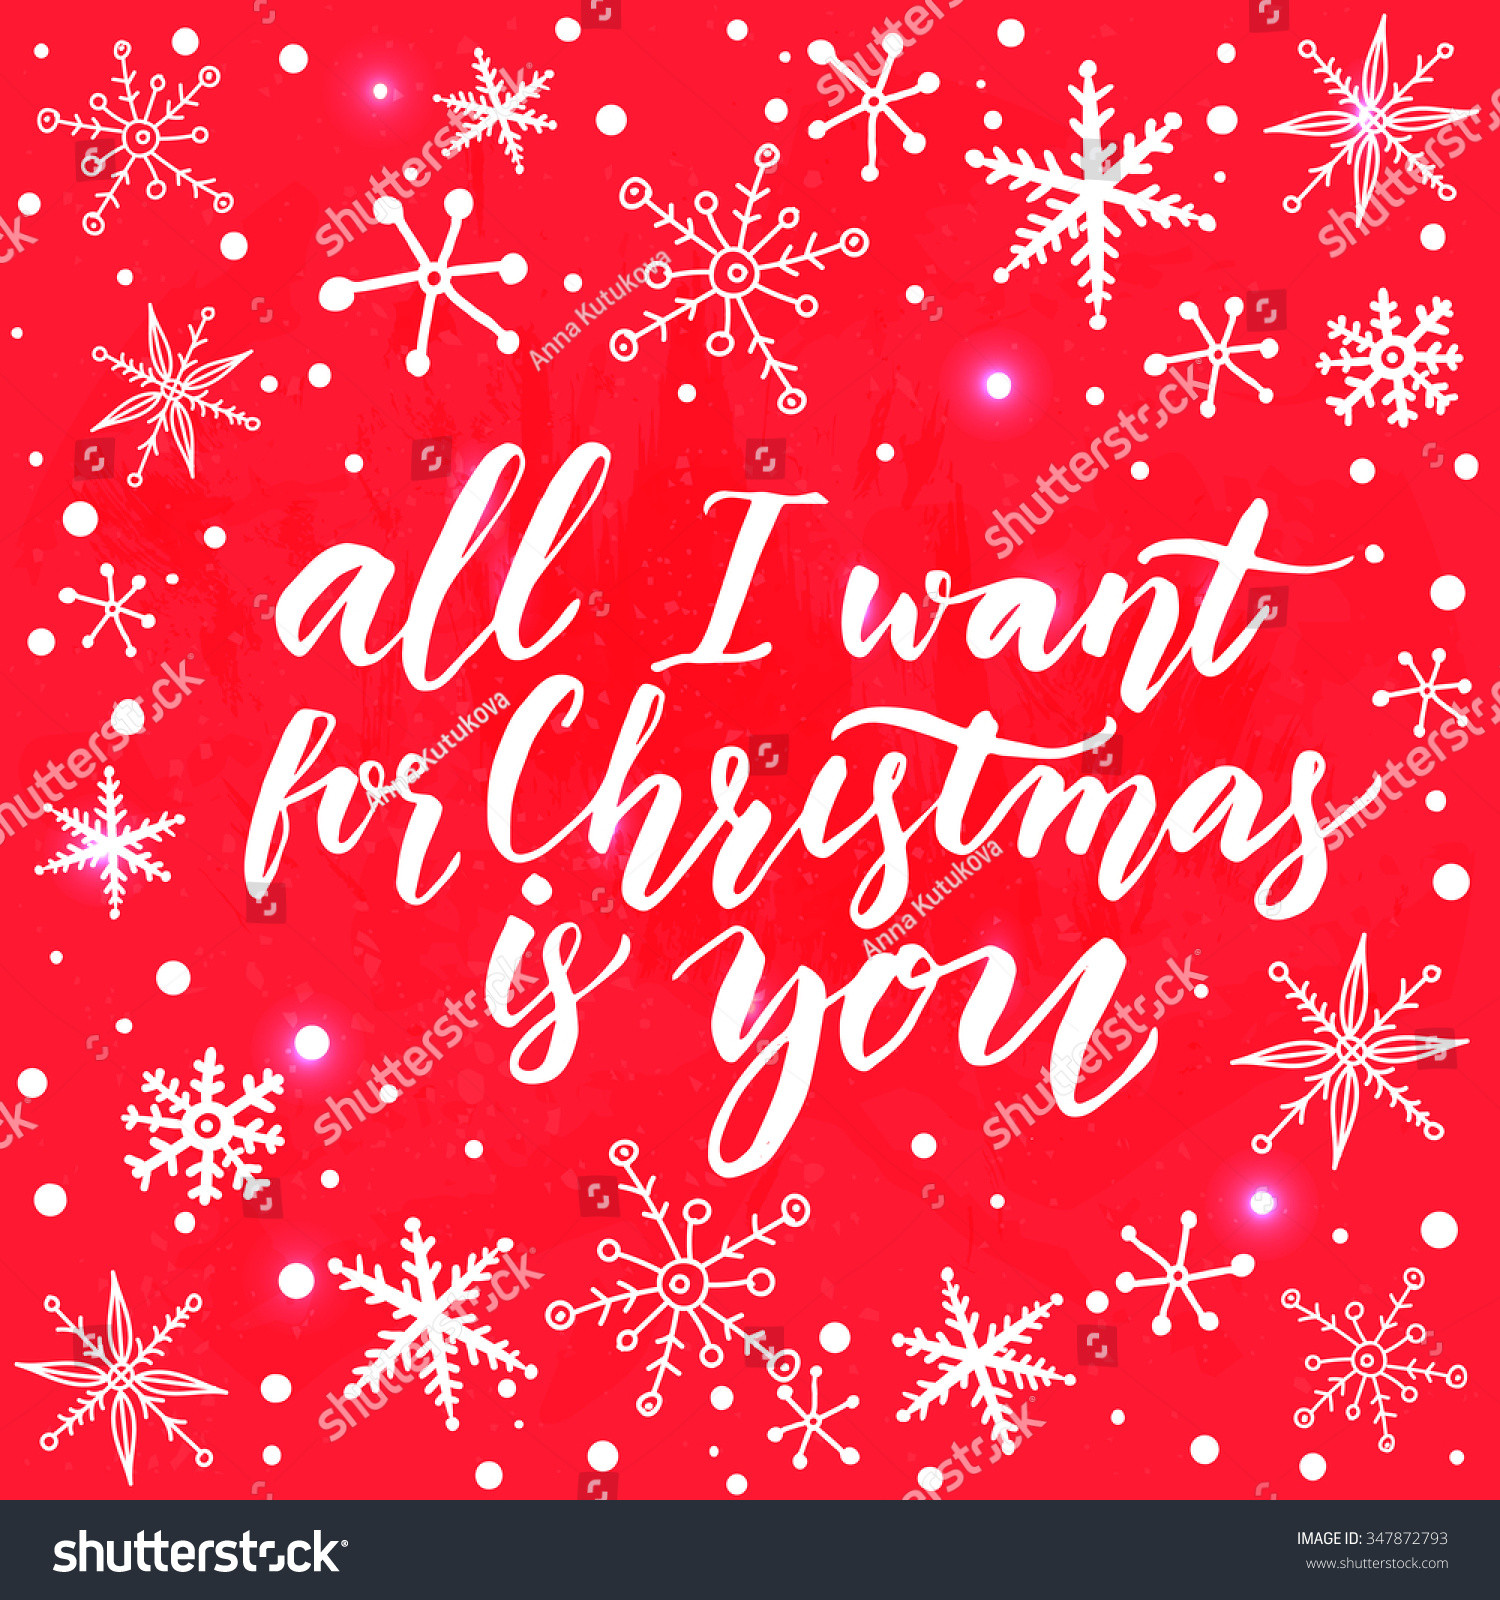 All I Want For Christmas Quotes
 All I Want For Christmas Is You Inspirational Quote For